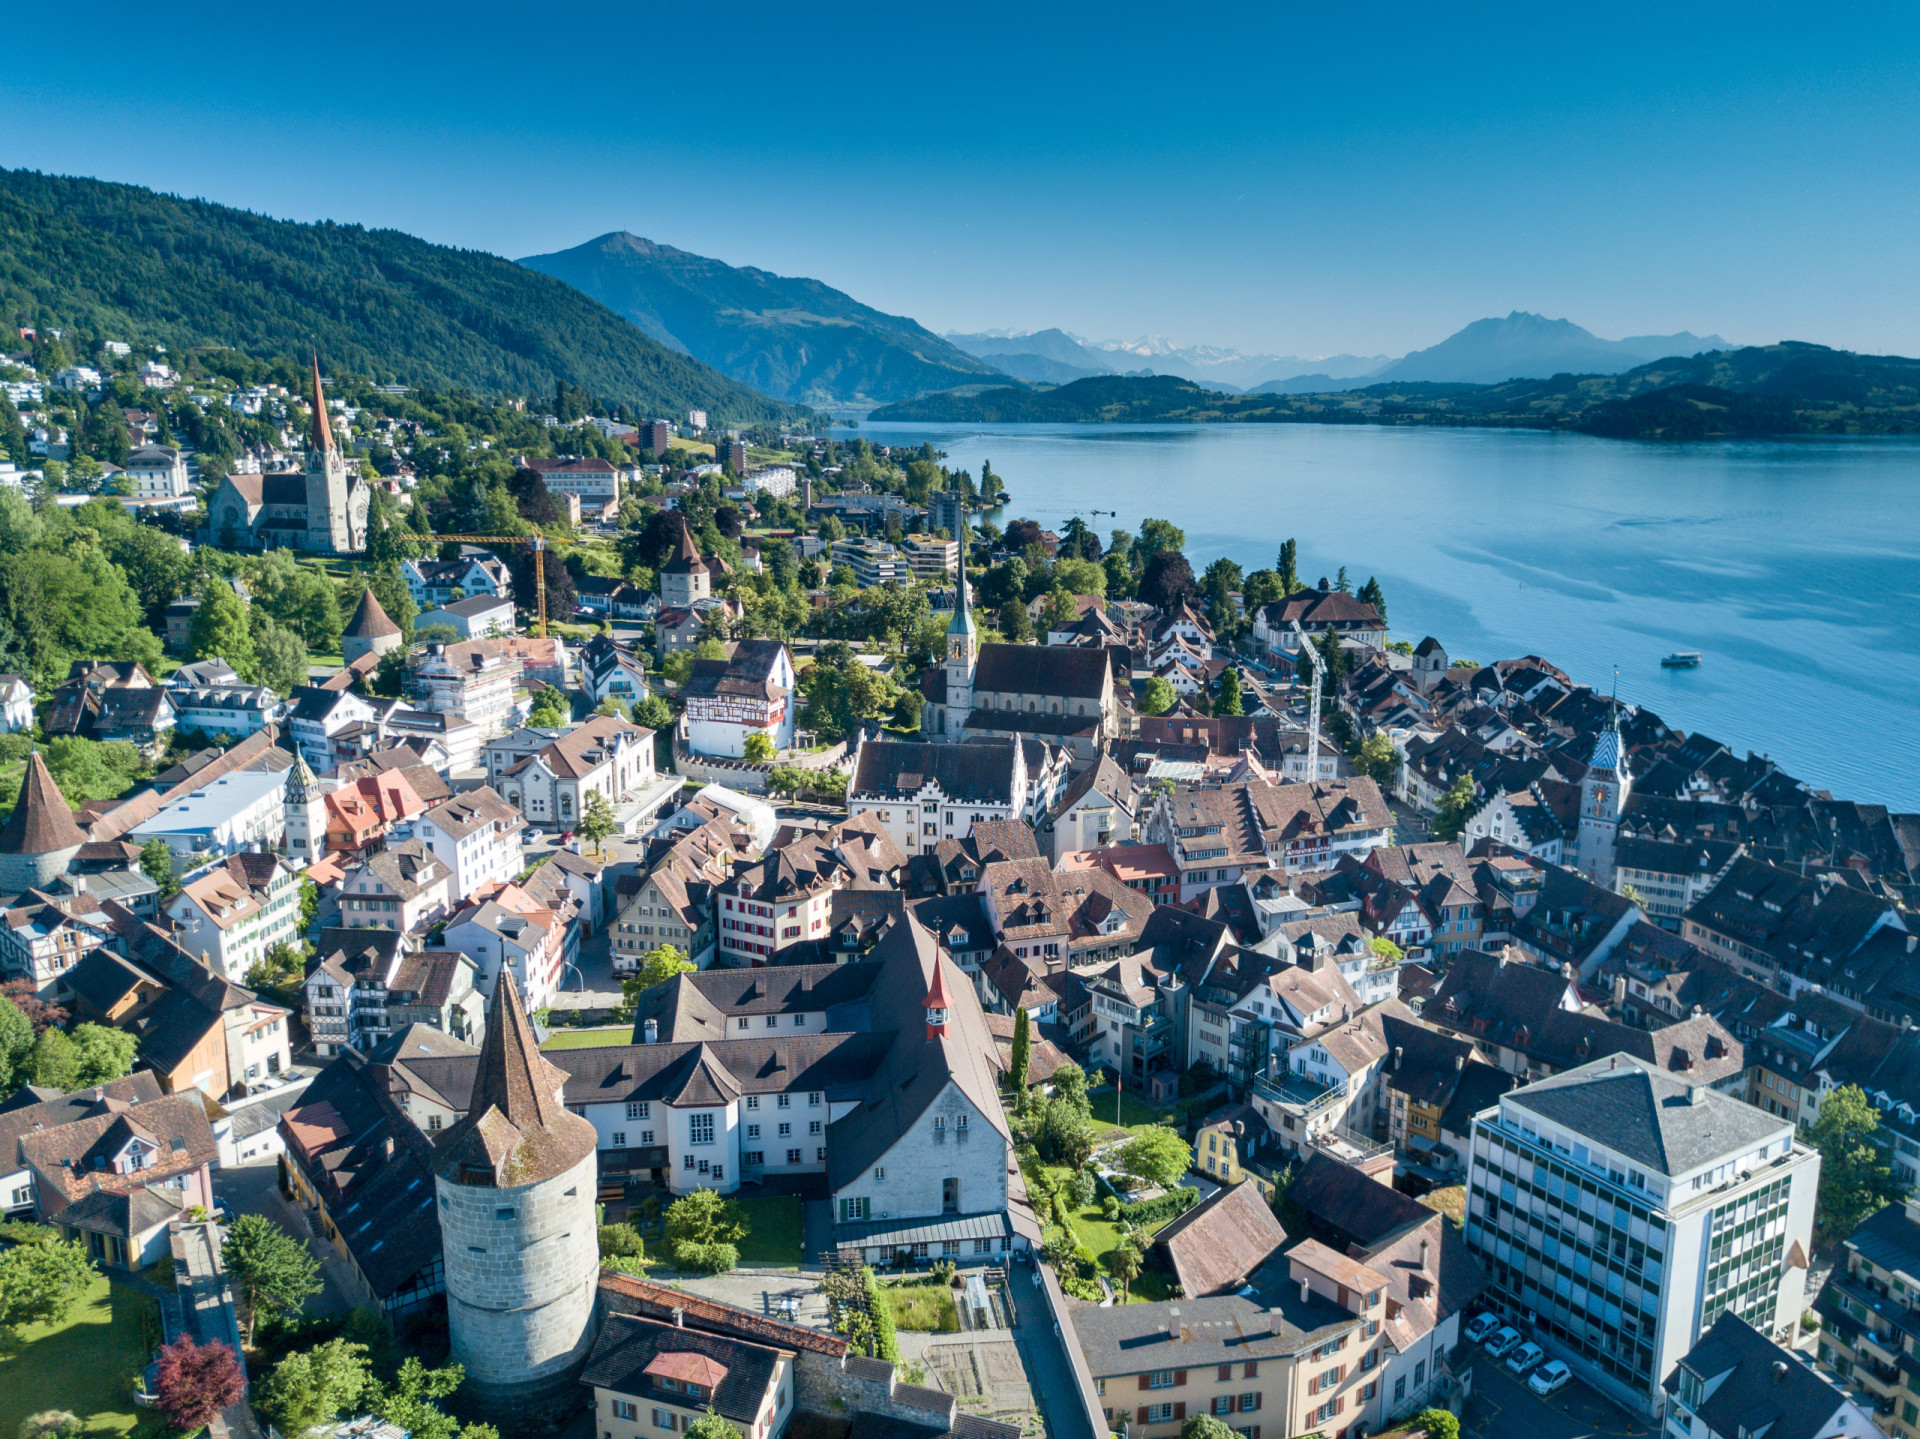 <p>Zug, with a rent index of 66.5, is a blend of ancient charm and modern affluence. Known for its low taxes and high quality of life, it's a discreet yet expensive haven for the wealthy.</p><p>You may also like:<a href="https://www.starsinsider.com/n/261830?utm_source=msn.com&utm_medium=display&utm_campaign=referral_description&utm_content=651794en-in"> Skip the gym and do these exercises at home instead</a></p>